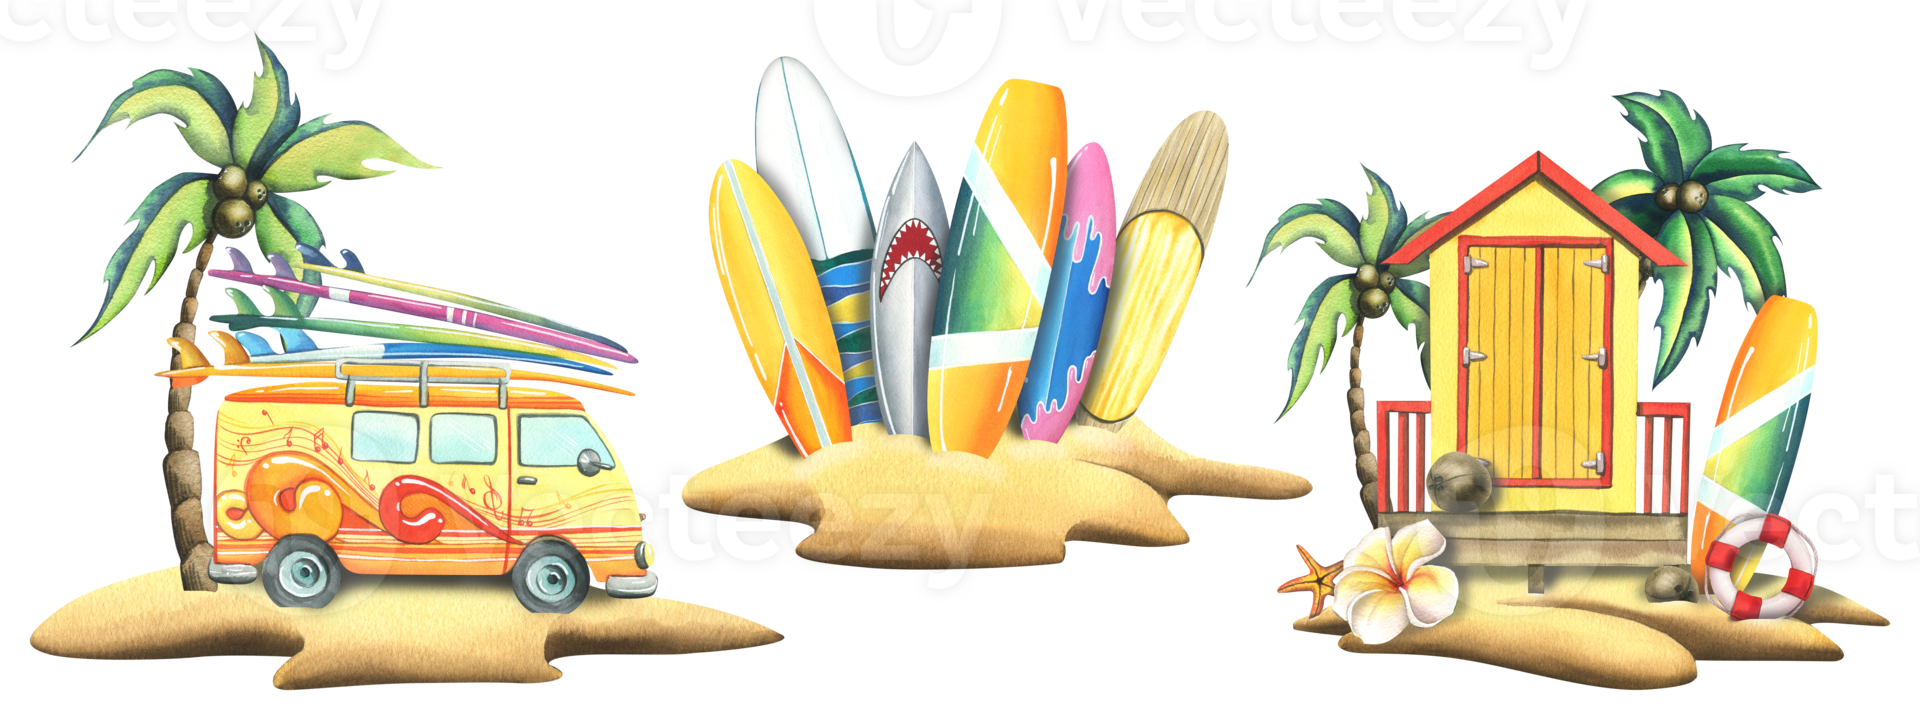 A yellow van with surfboards and beach cabin on a sandy island with a coconut palm. Watercolor illustration hand drawn. Isolated compositions png